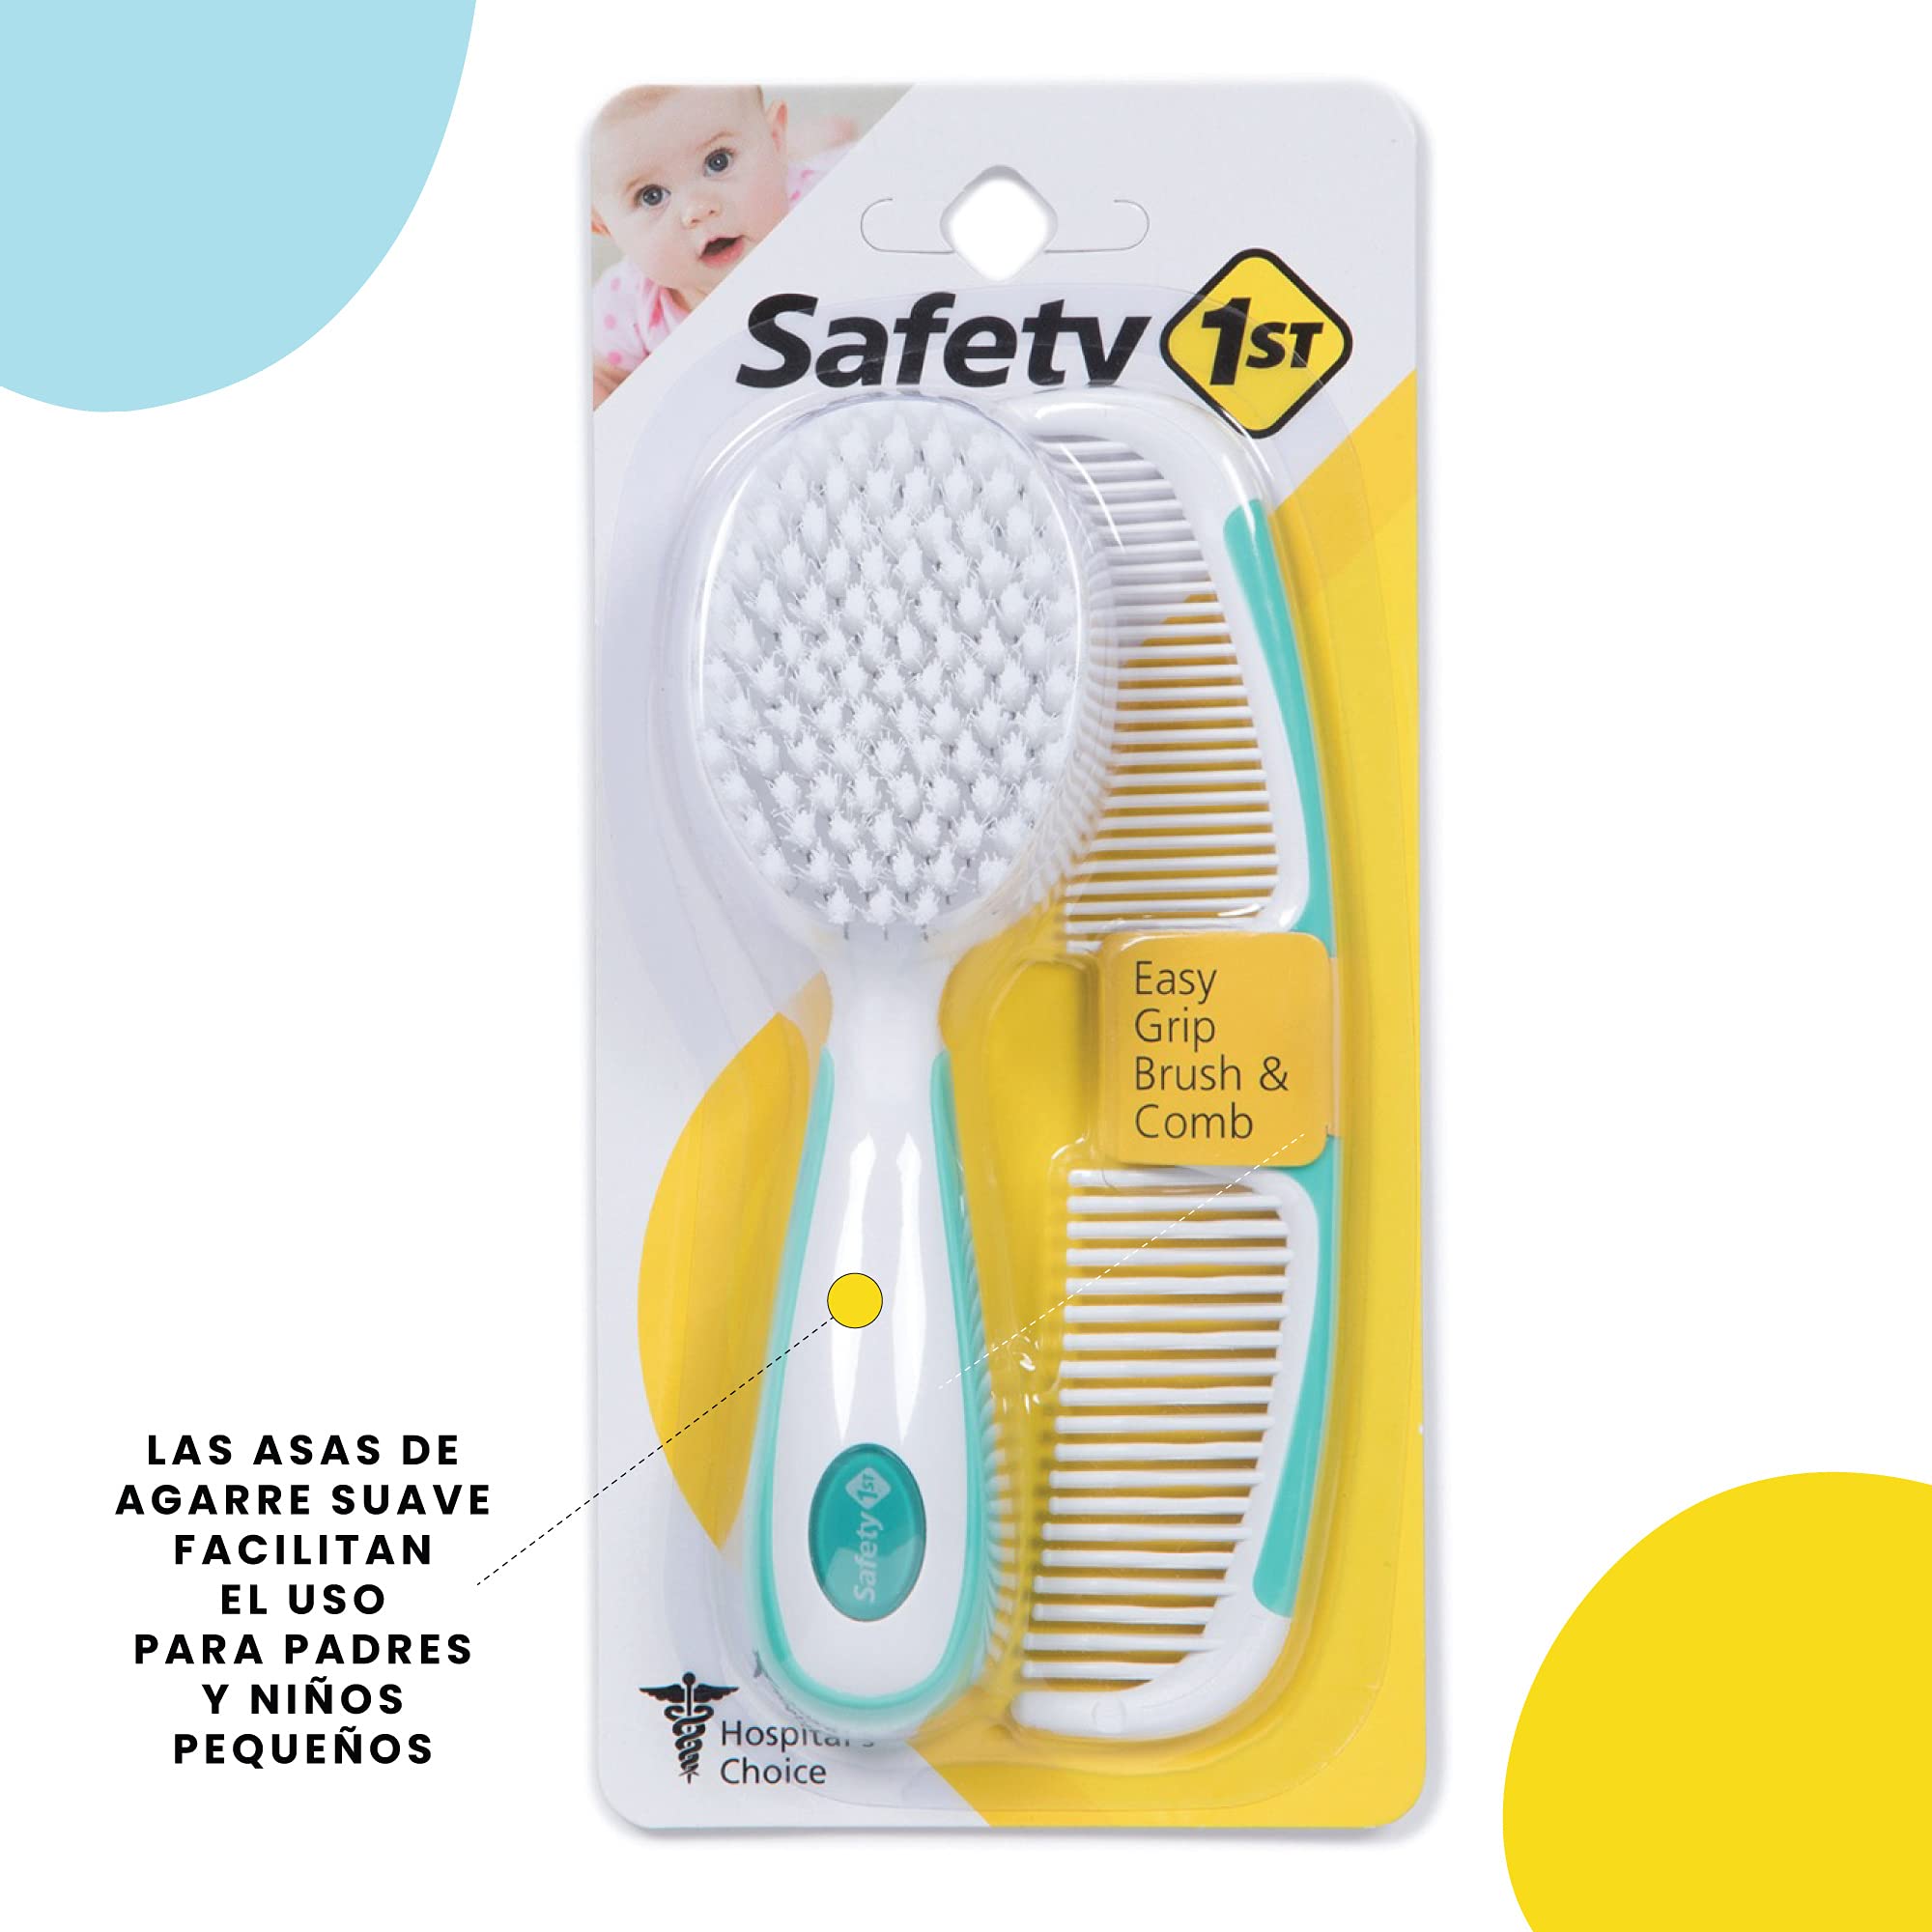 Safety 1st Easy Grip Brush and Comb, Colors May Vary